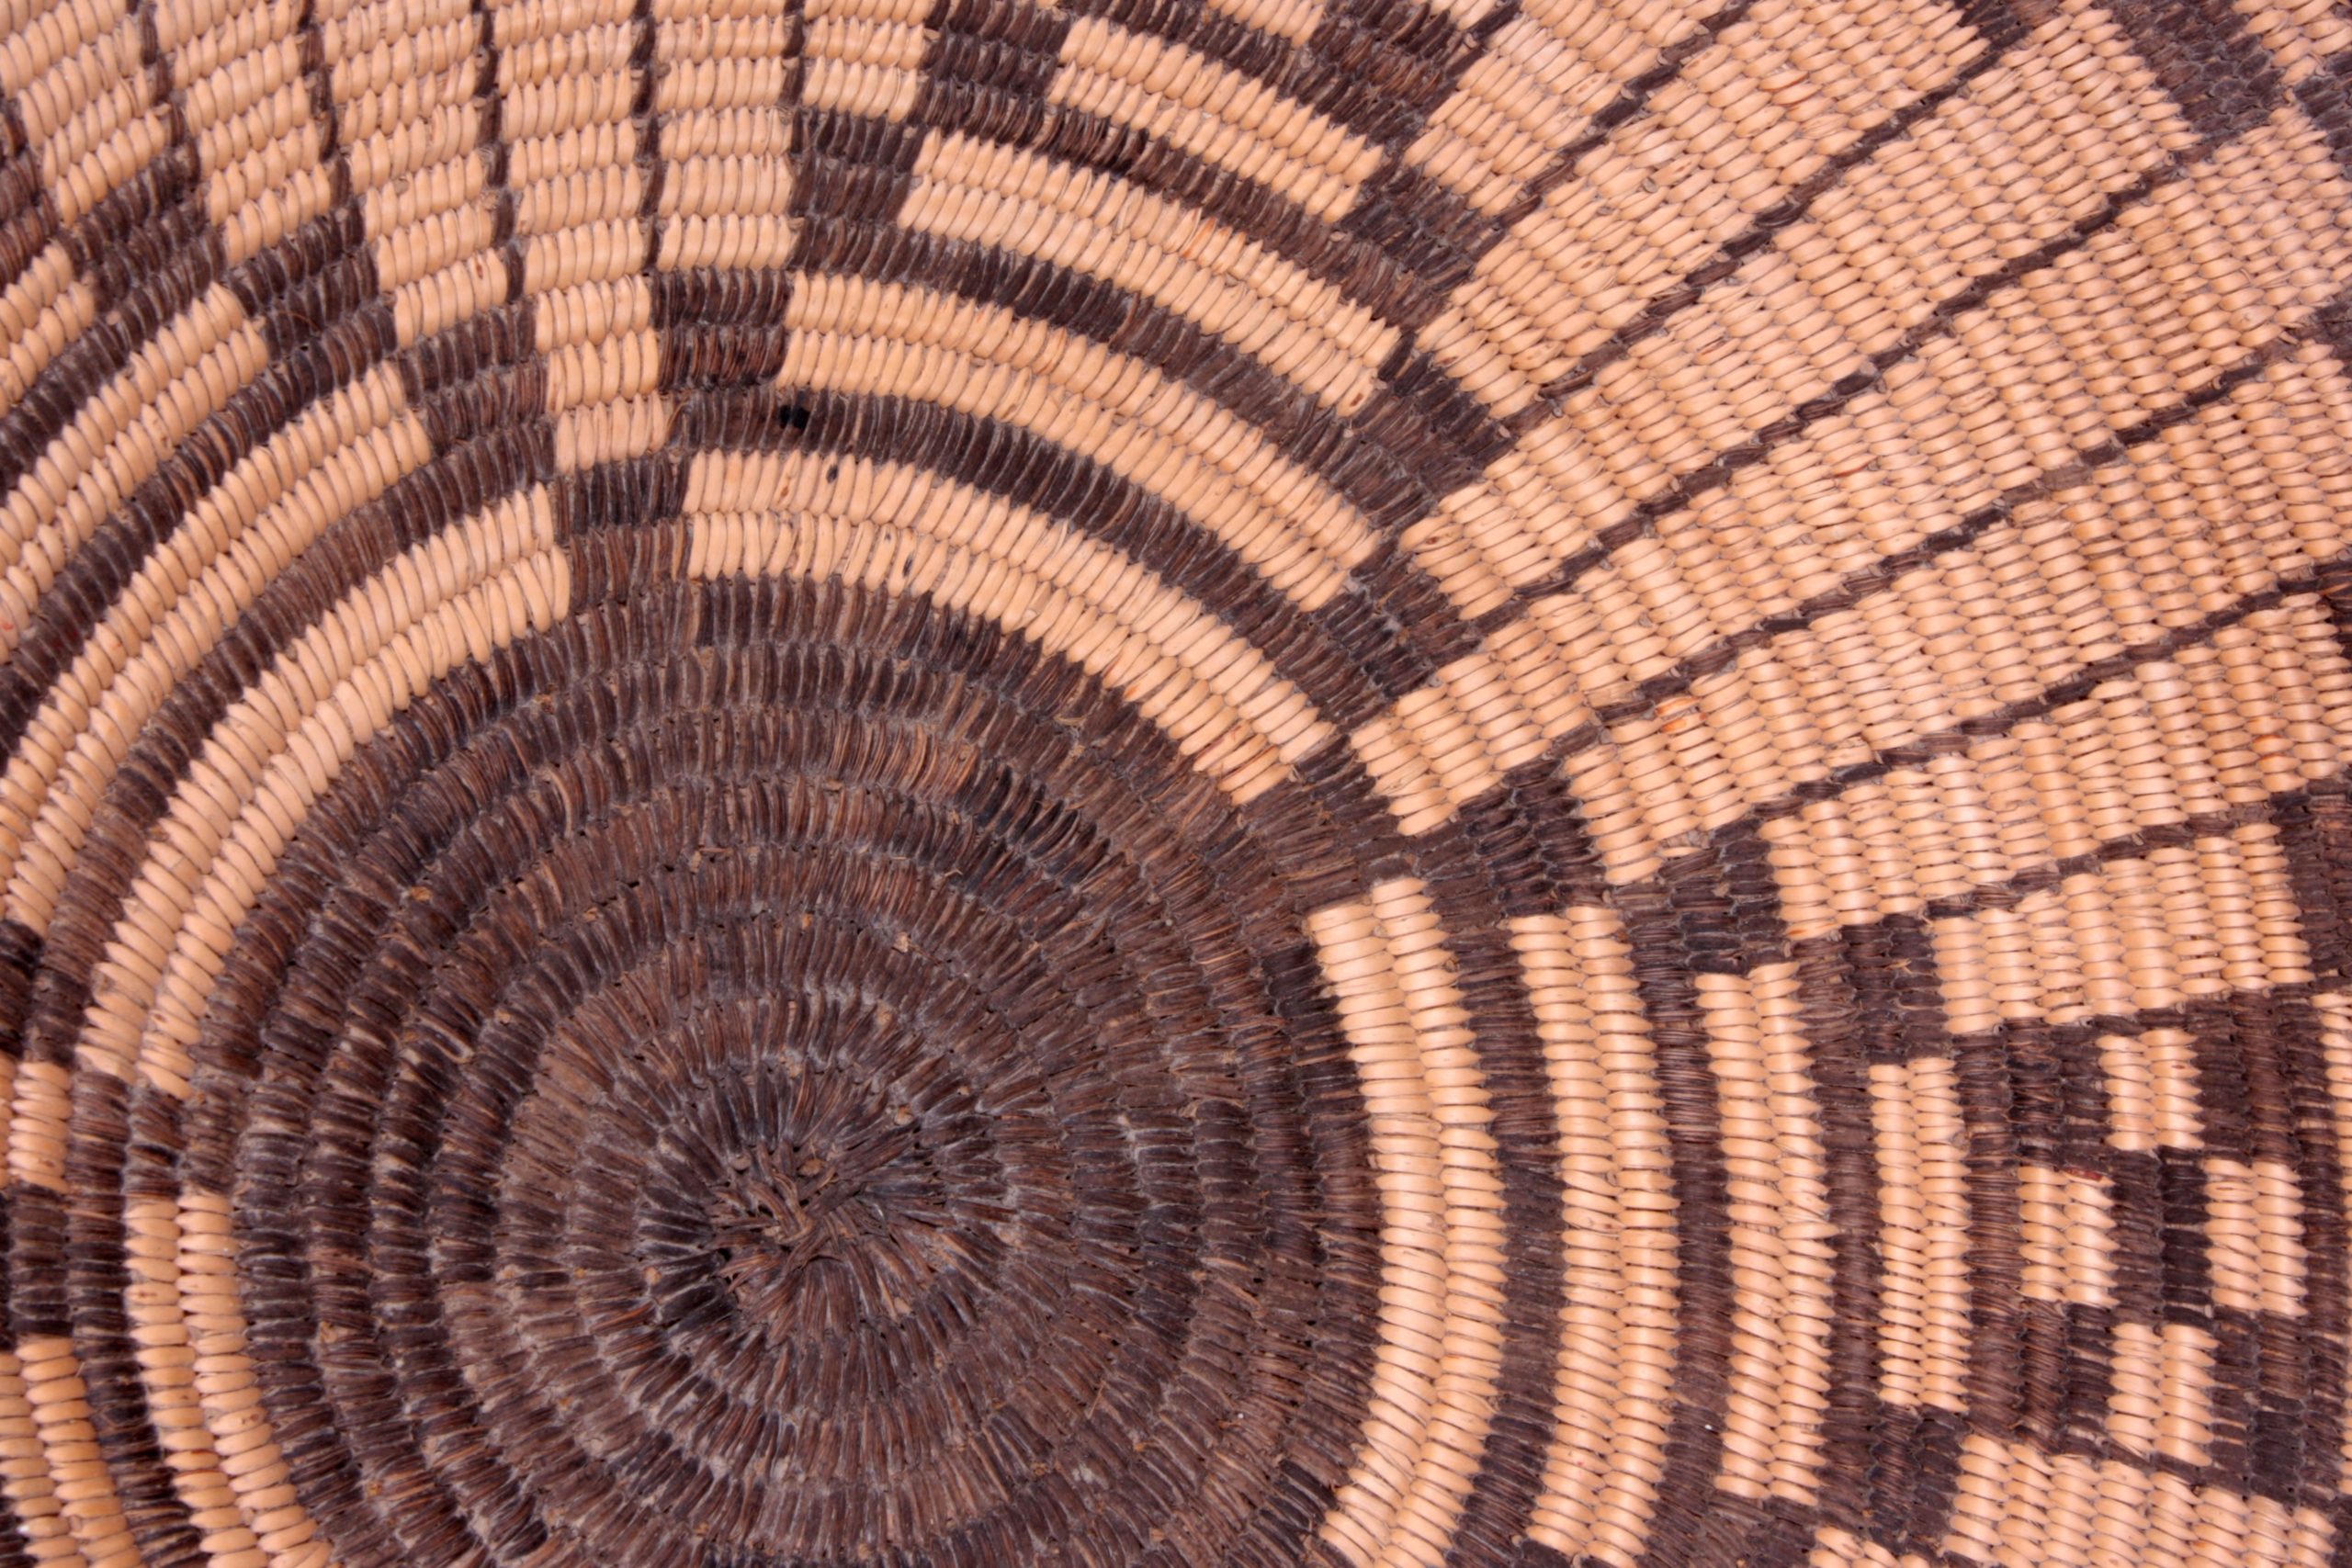 Close-up image of basket with round pattern in center and petal shaped patterns emerging from the center design